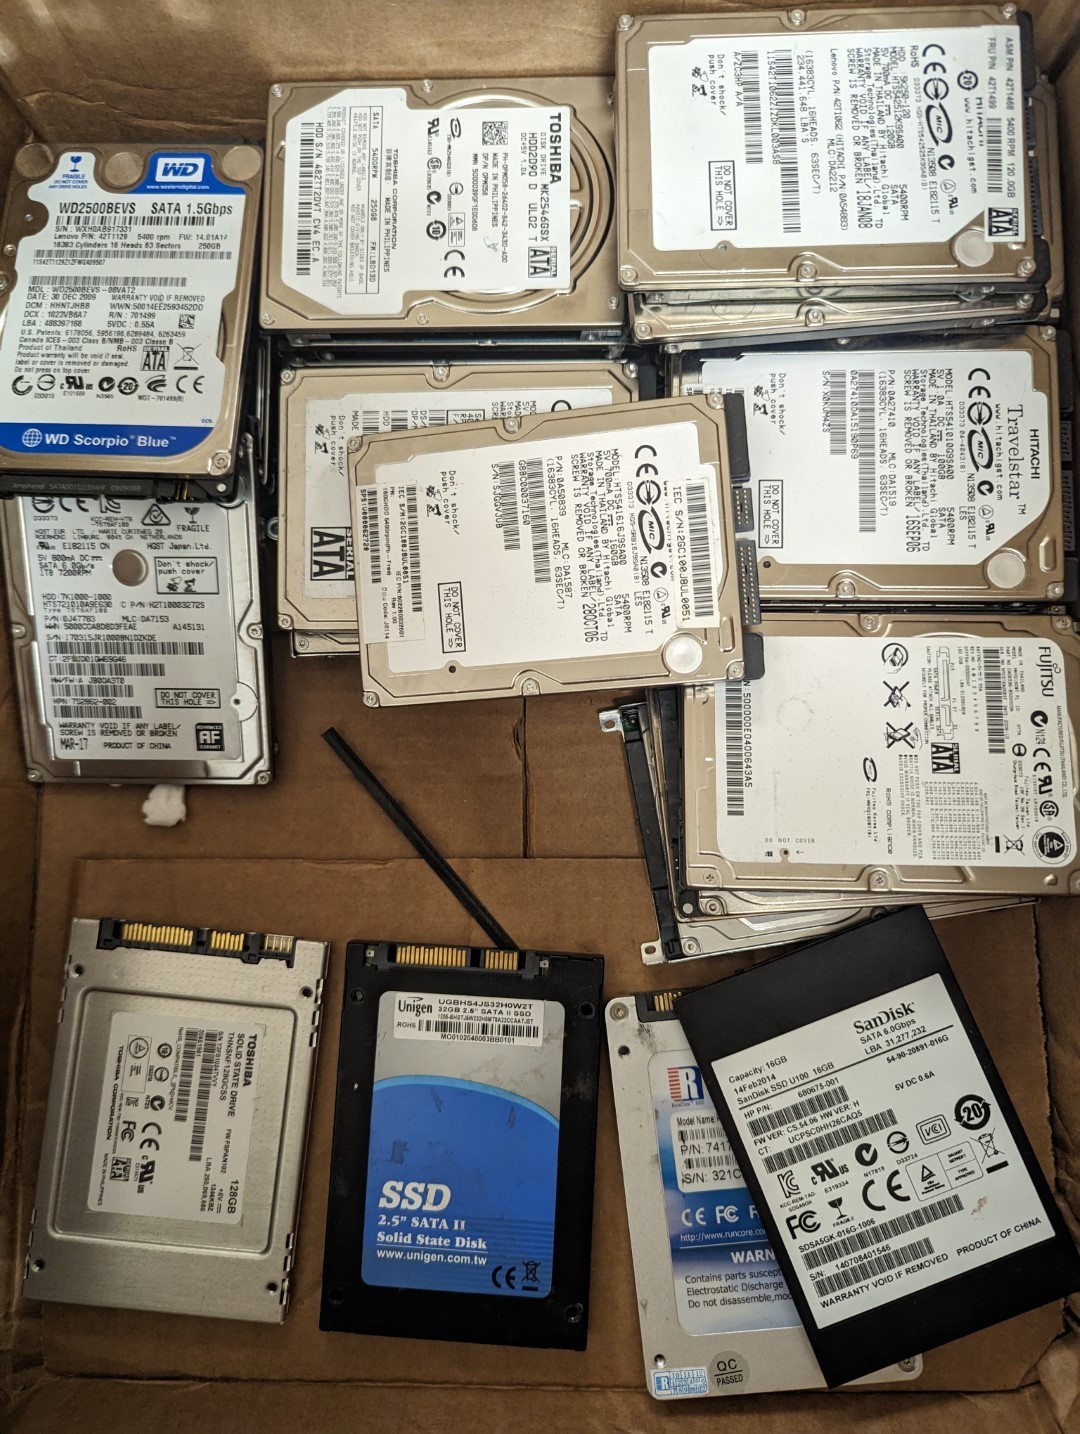 Lot of 36 units of 2.5" 32x HDD for 4x SSD For Parts